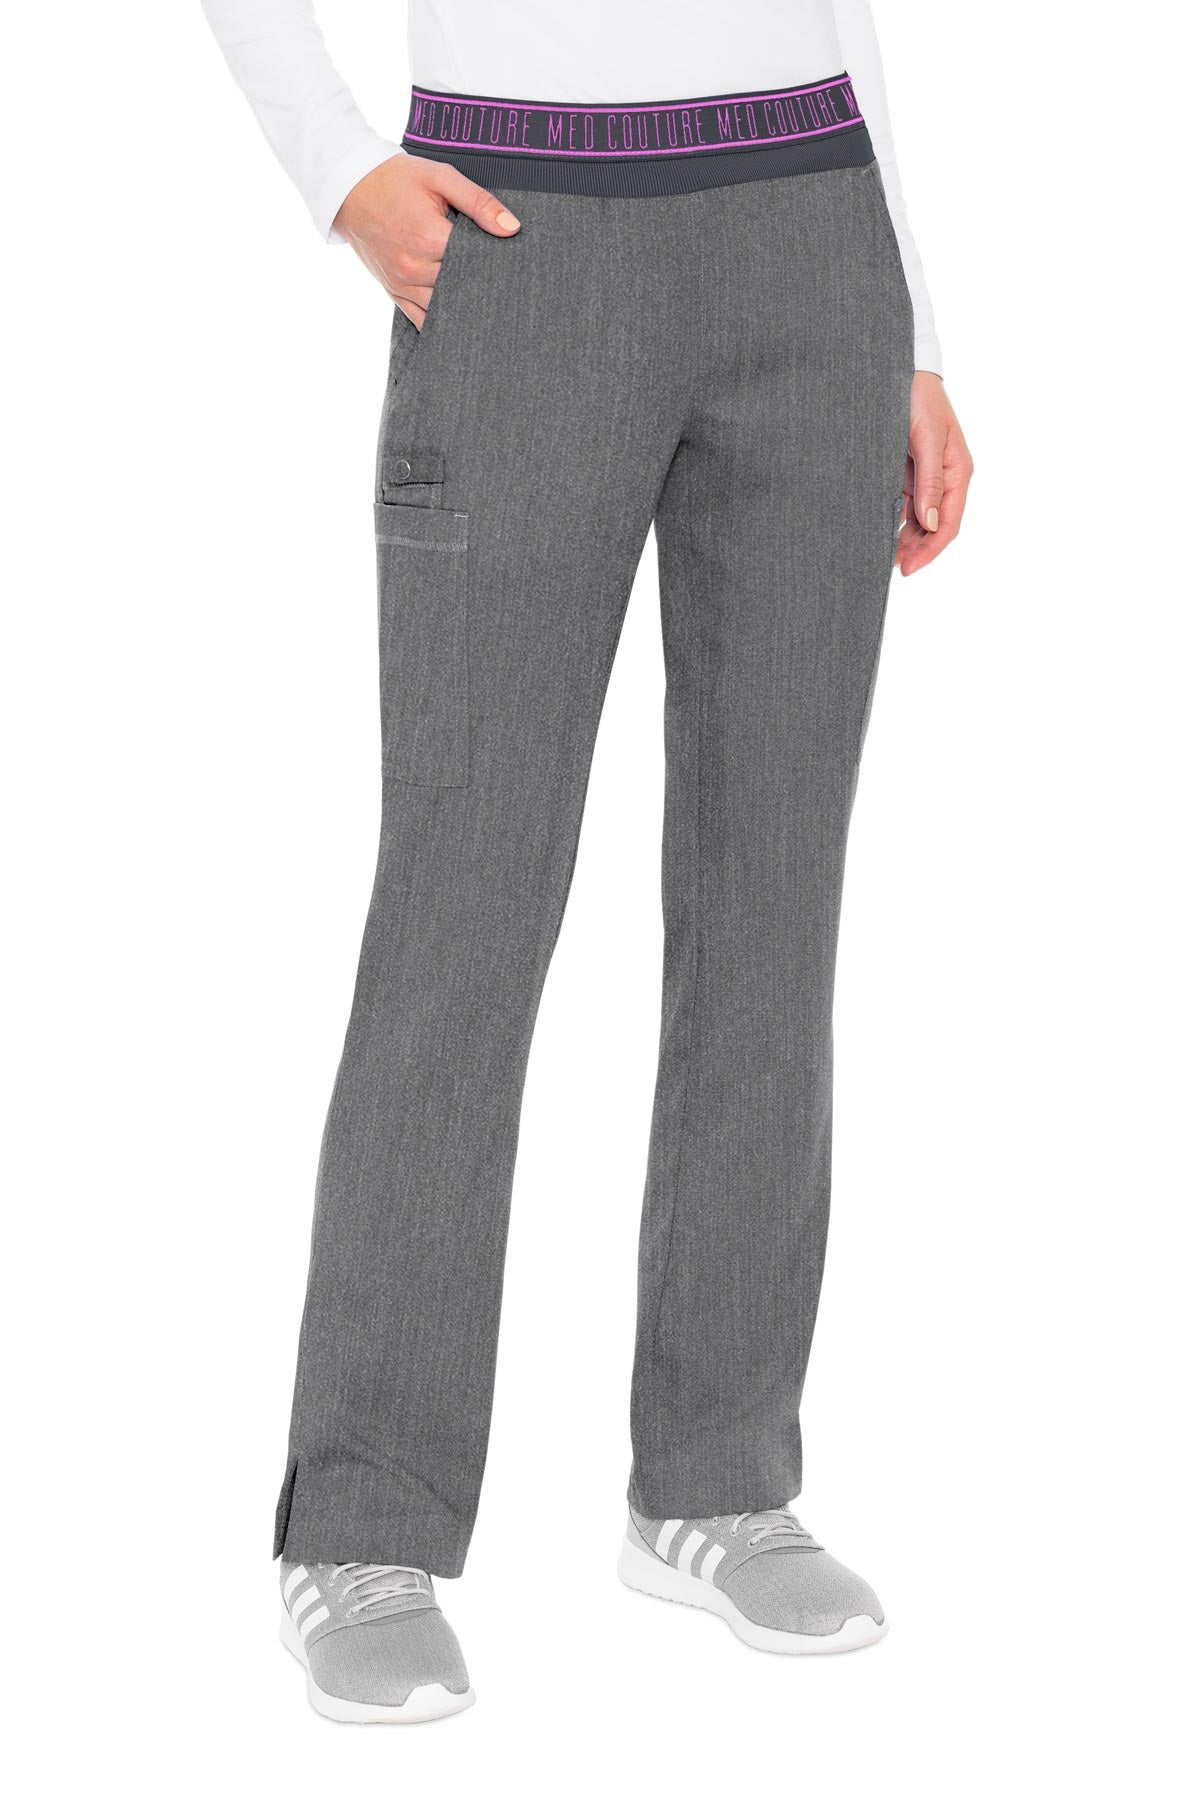 Med Couture Slate PANT